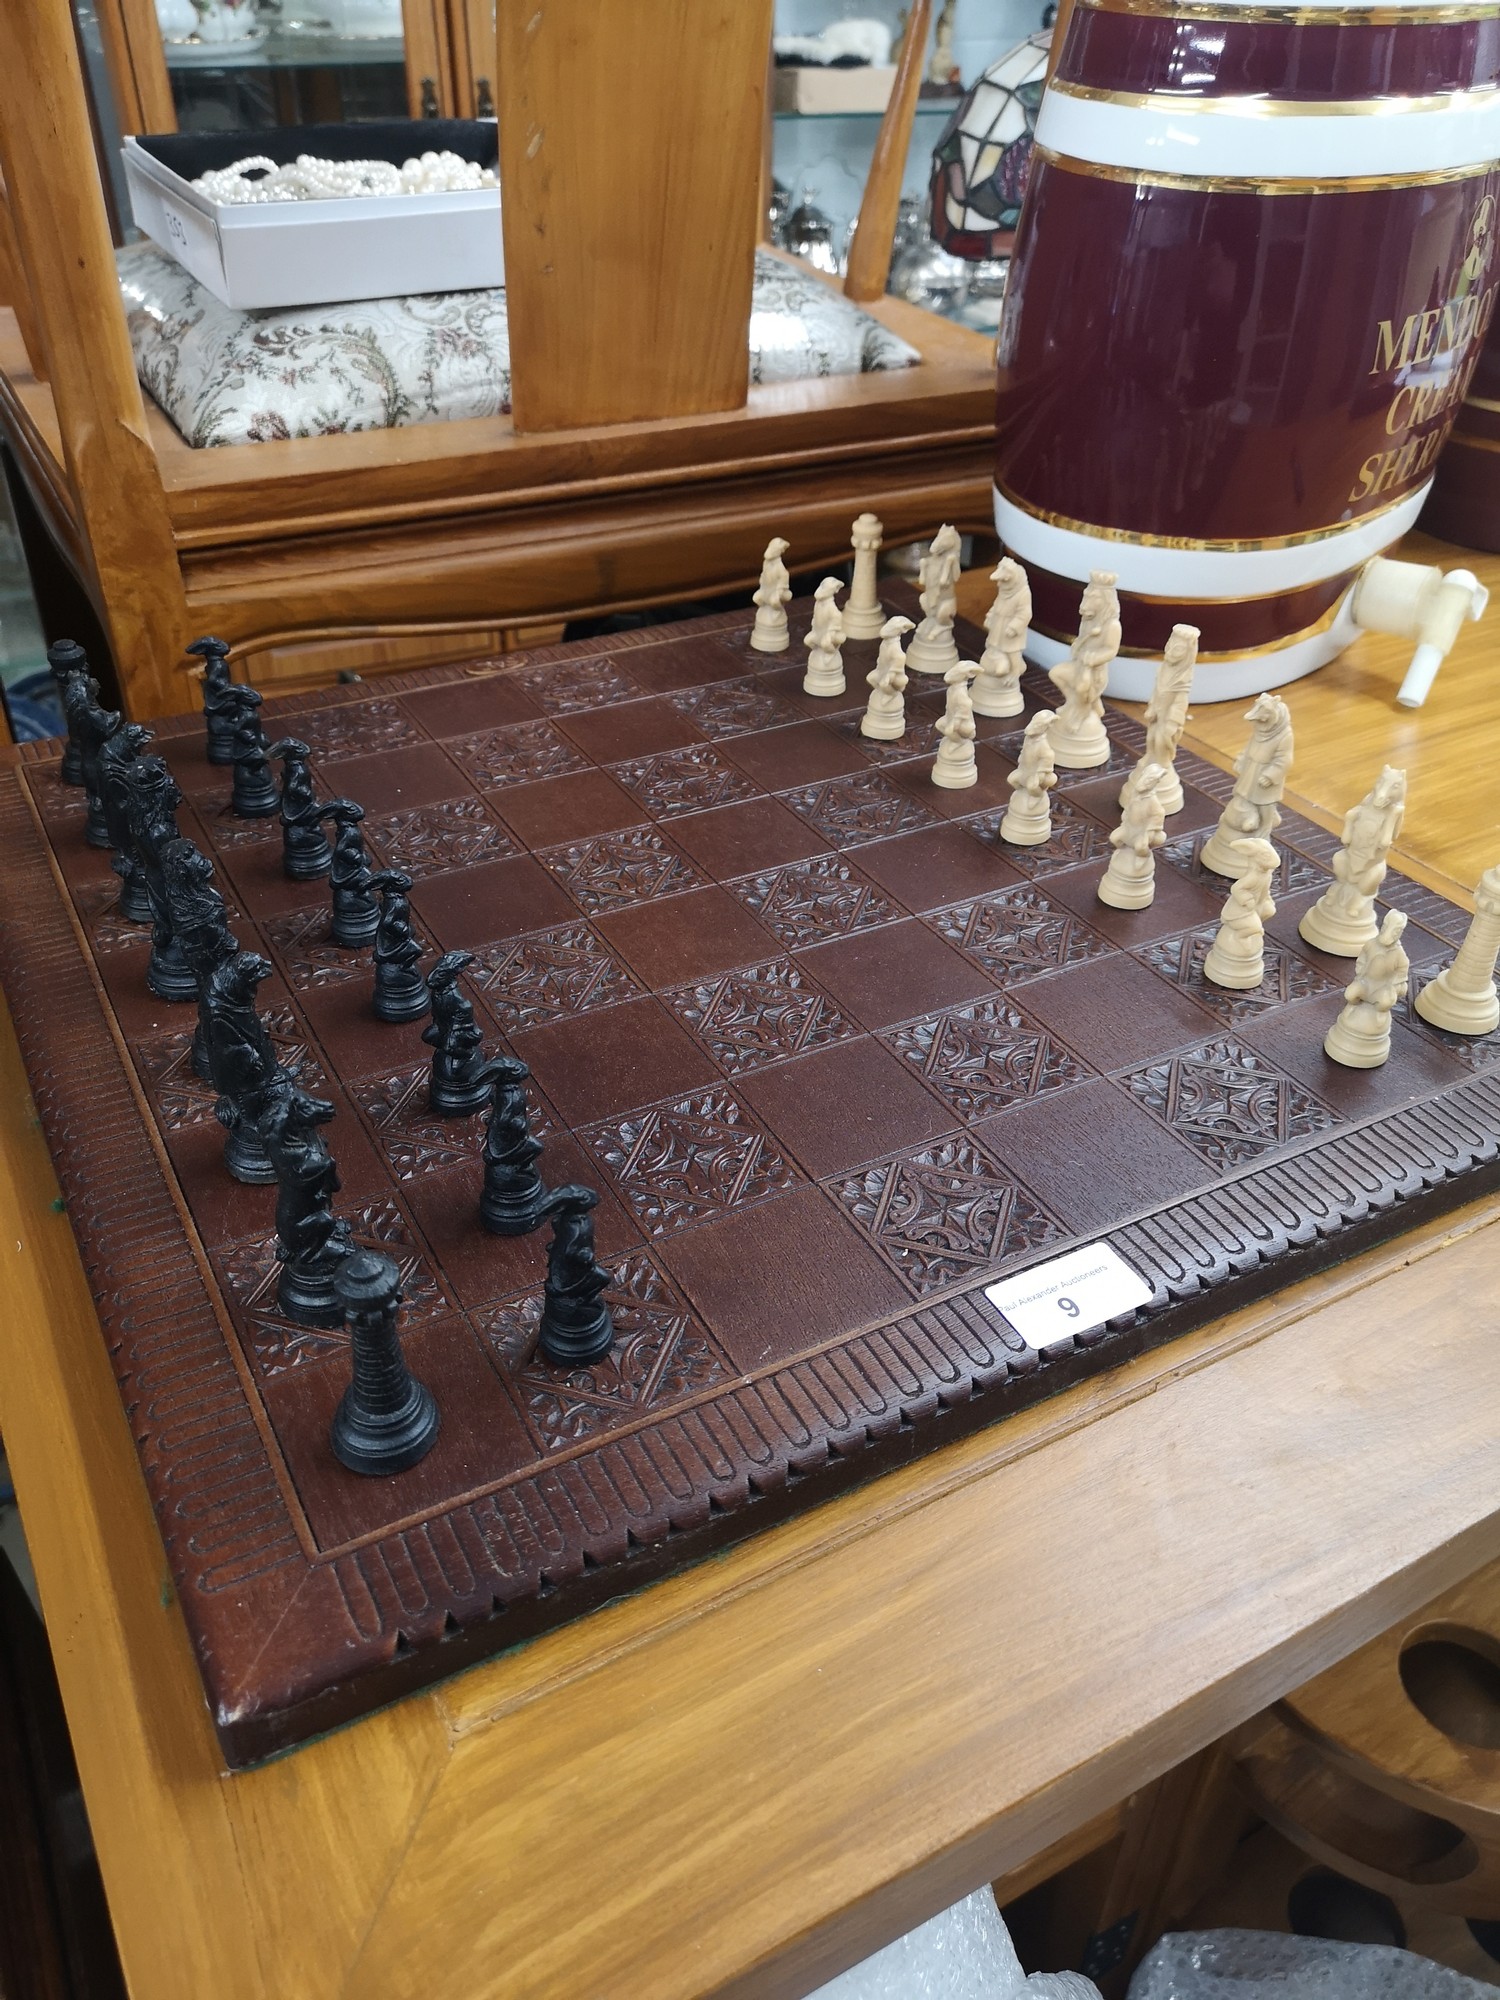 Large animal carved chess set with wooden board.